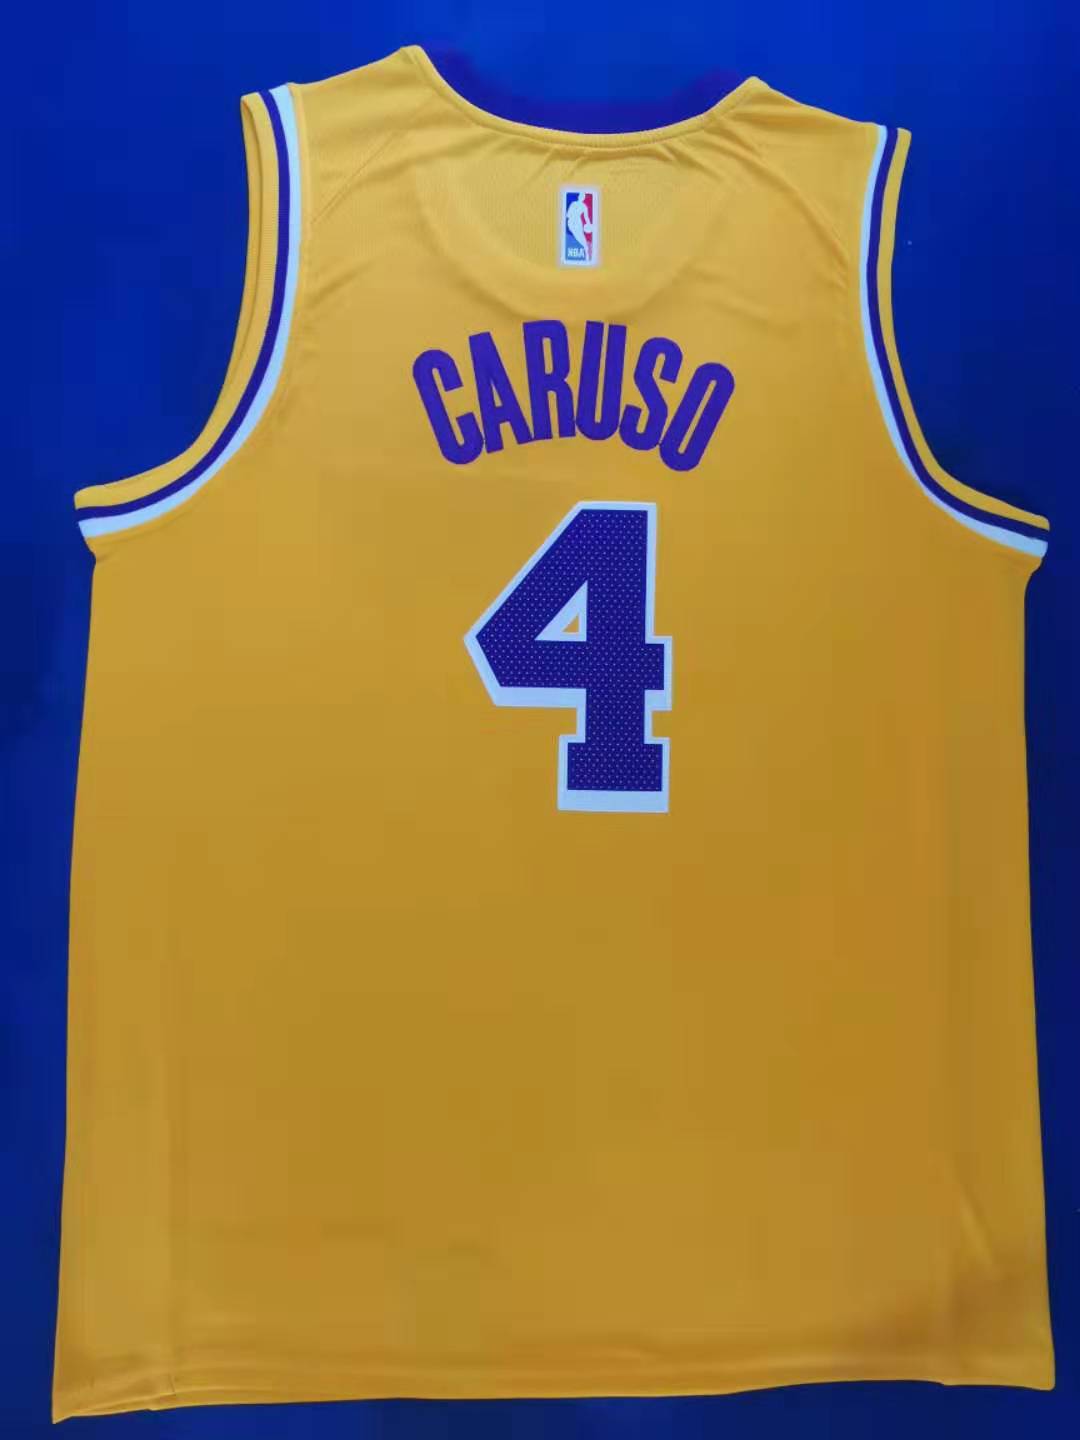 caruso lakers jersey